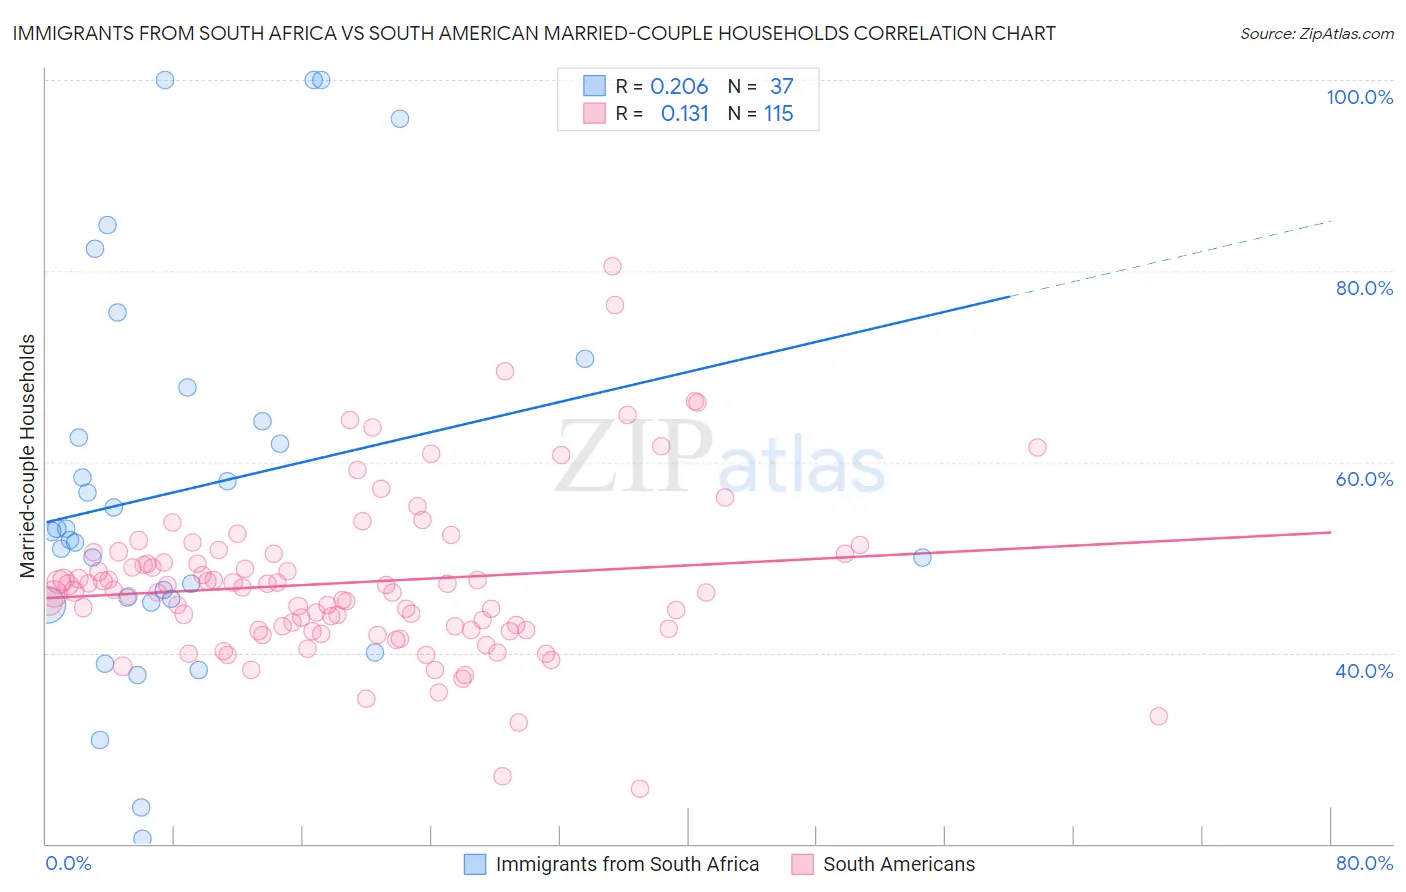 Immigrants from South Africa vs South American Married-couple Households